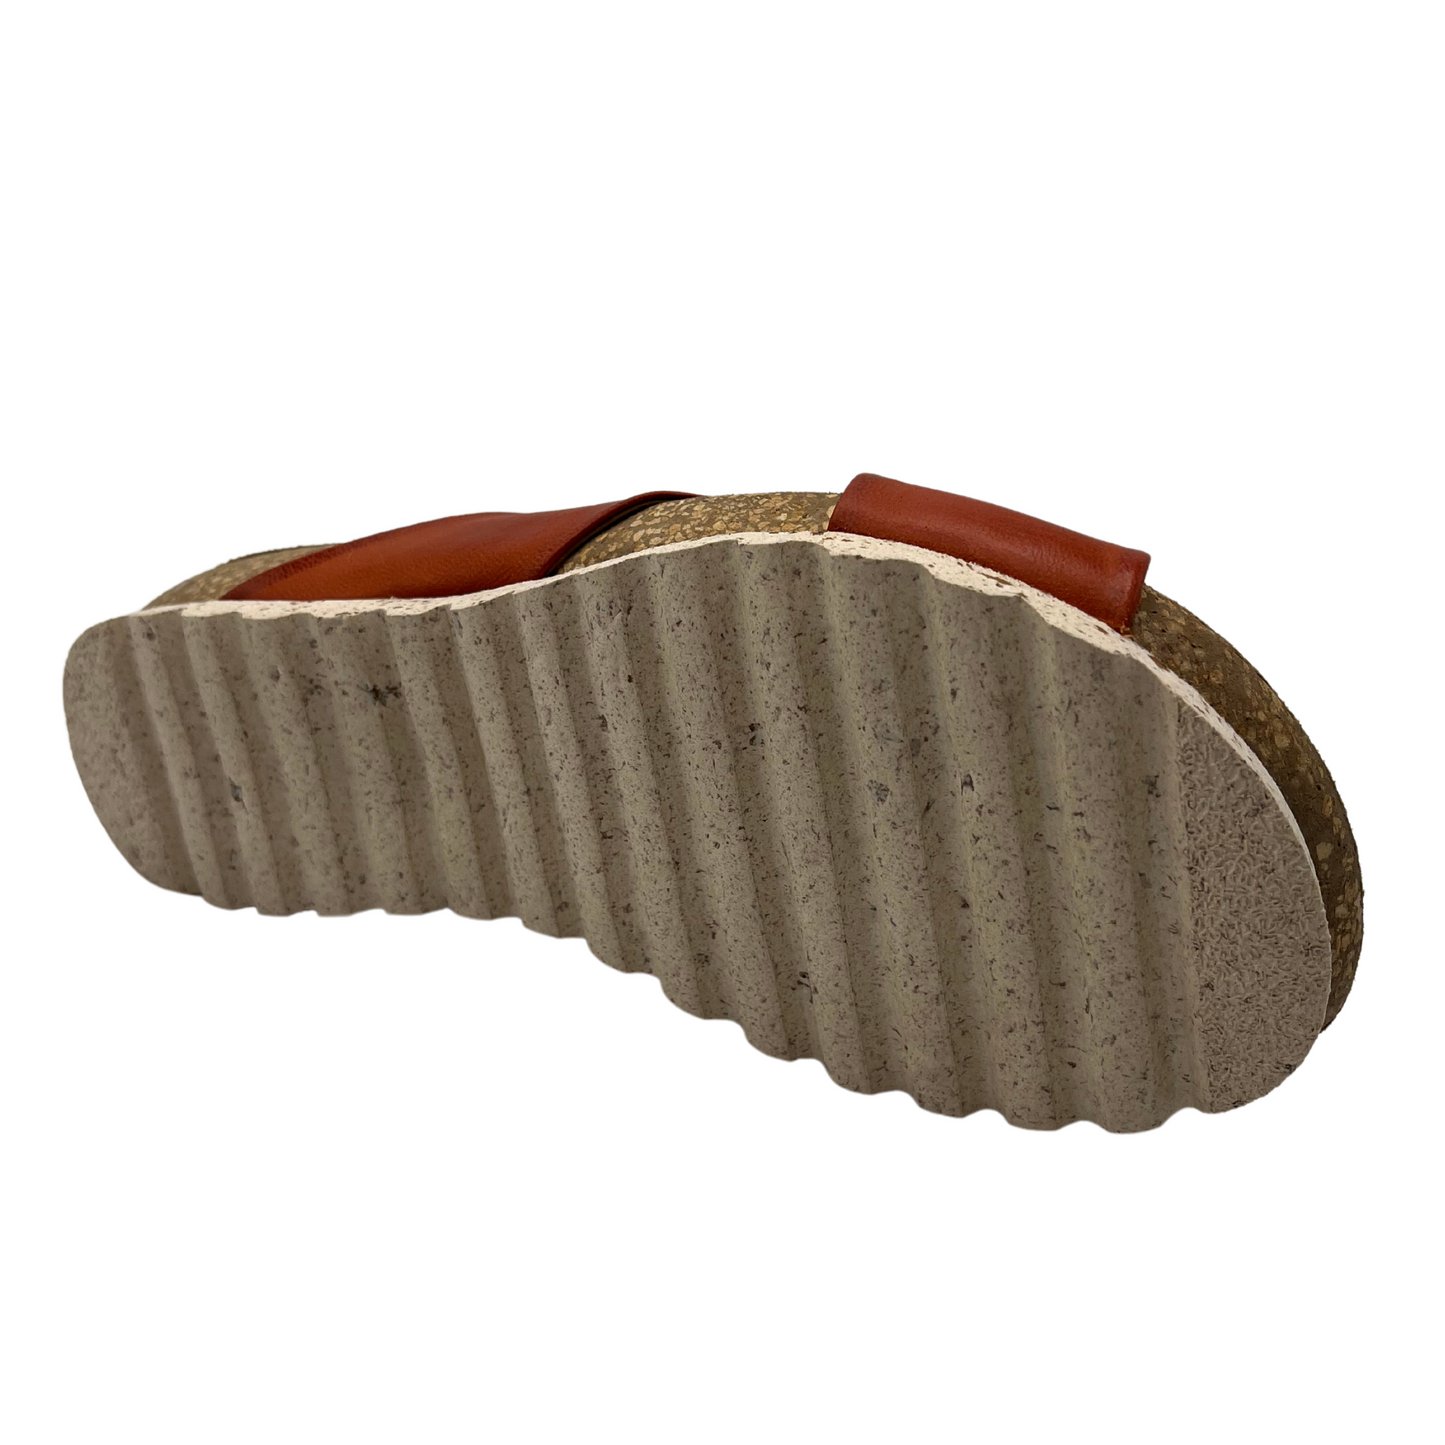 Bottom view of sandal with red leather straps and cork footbed